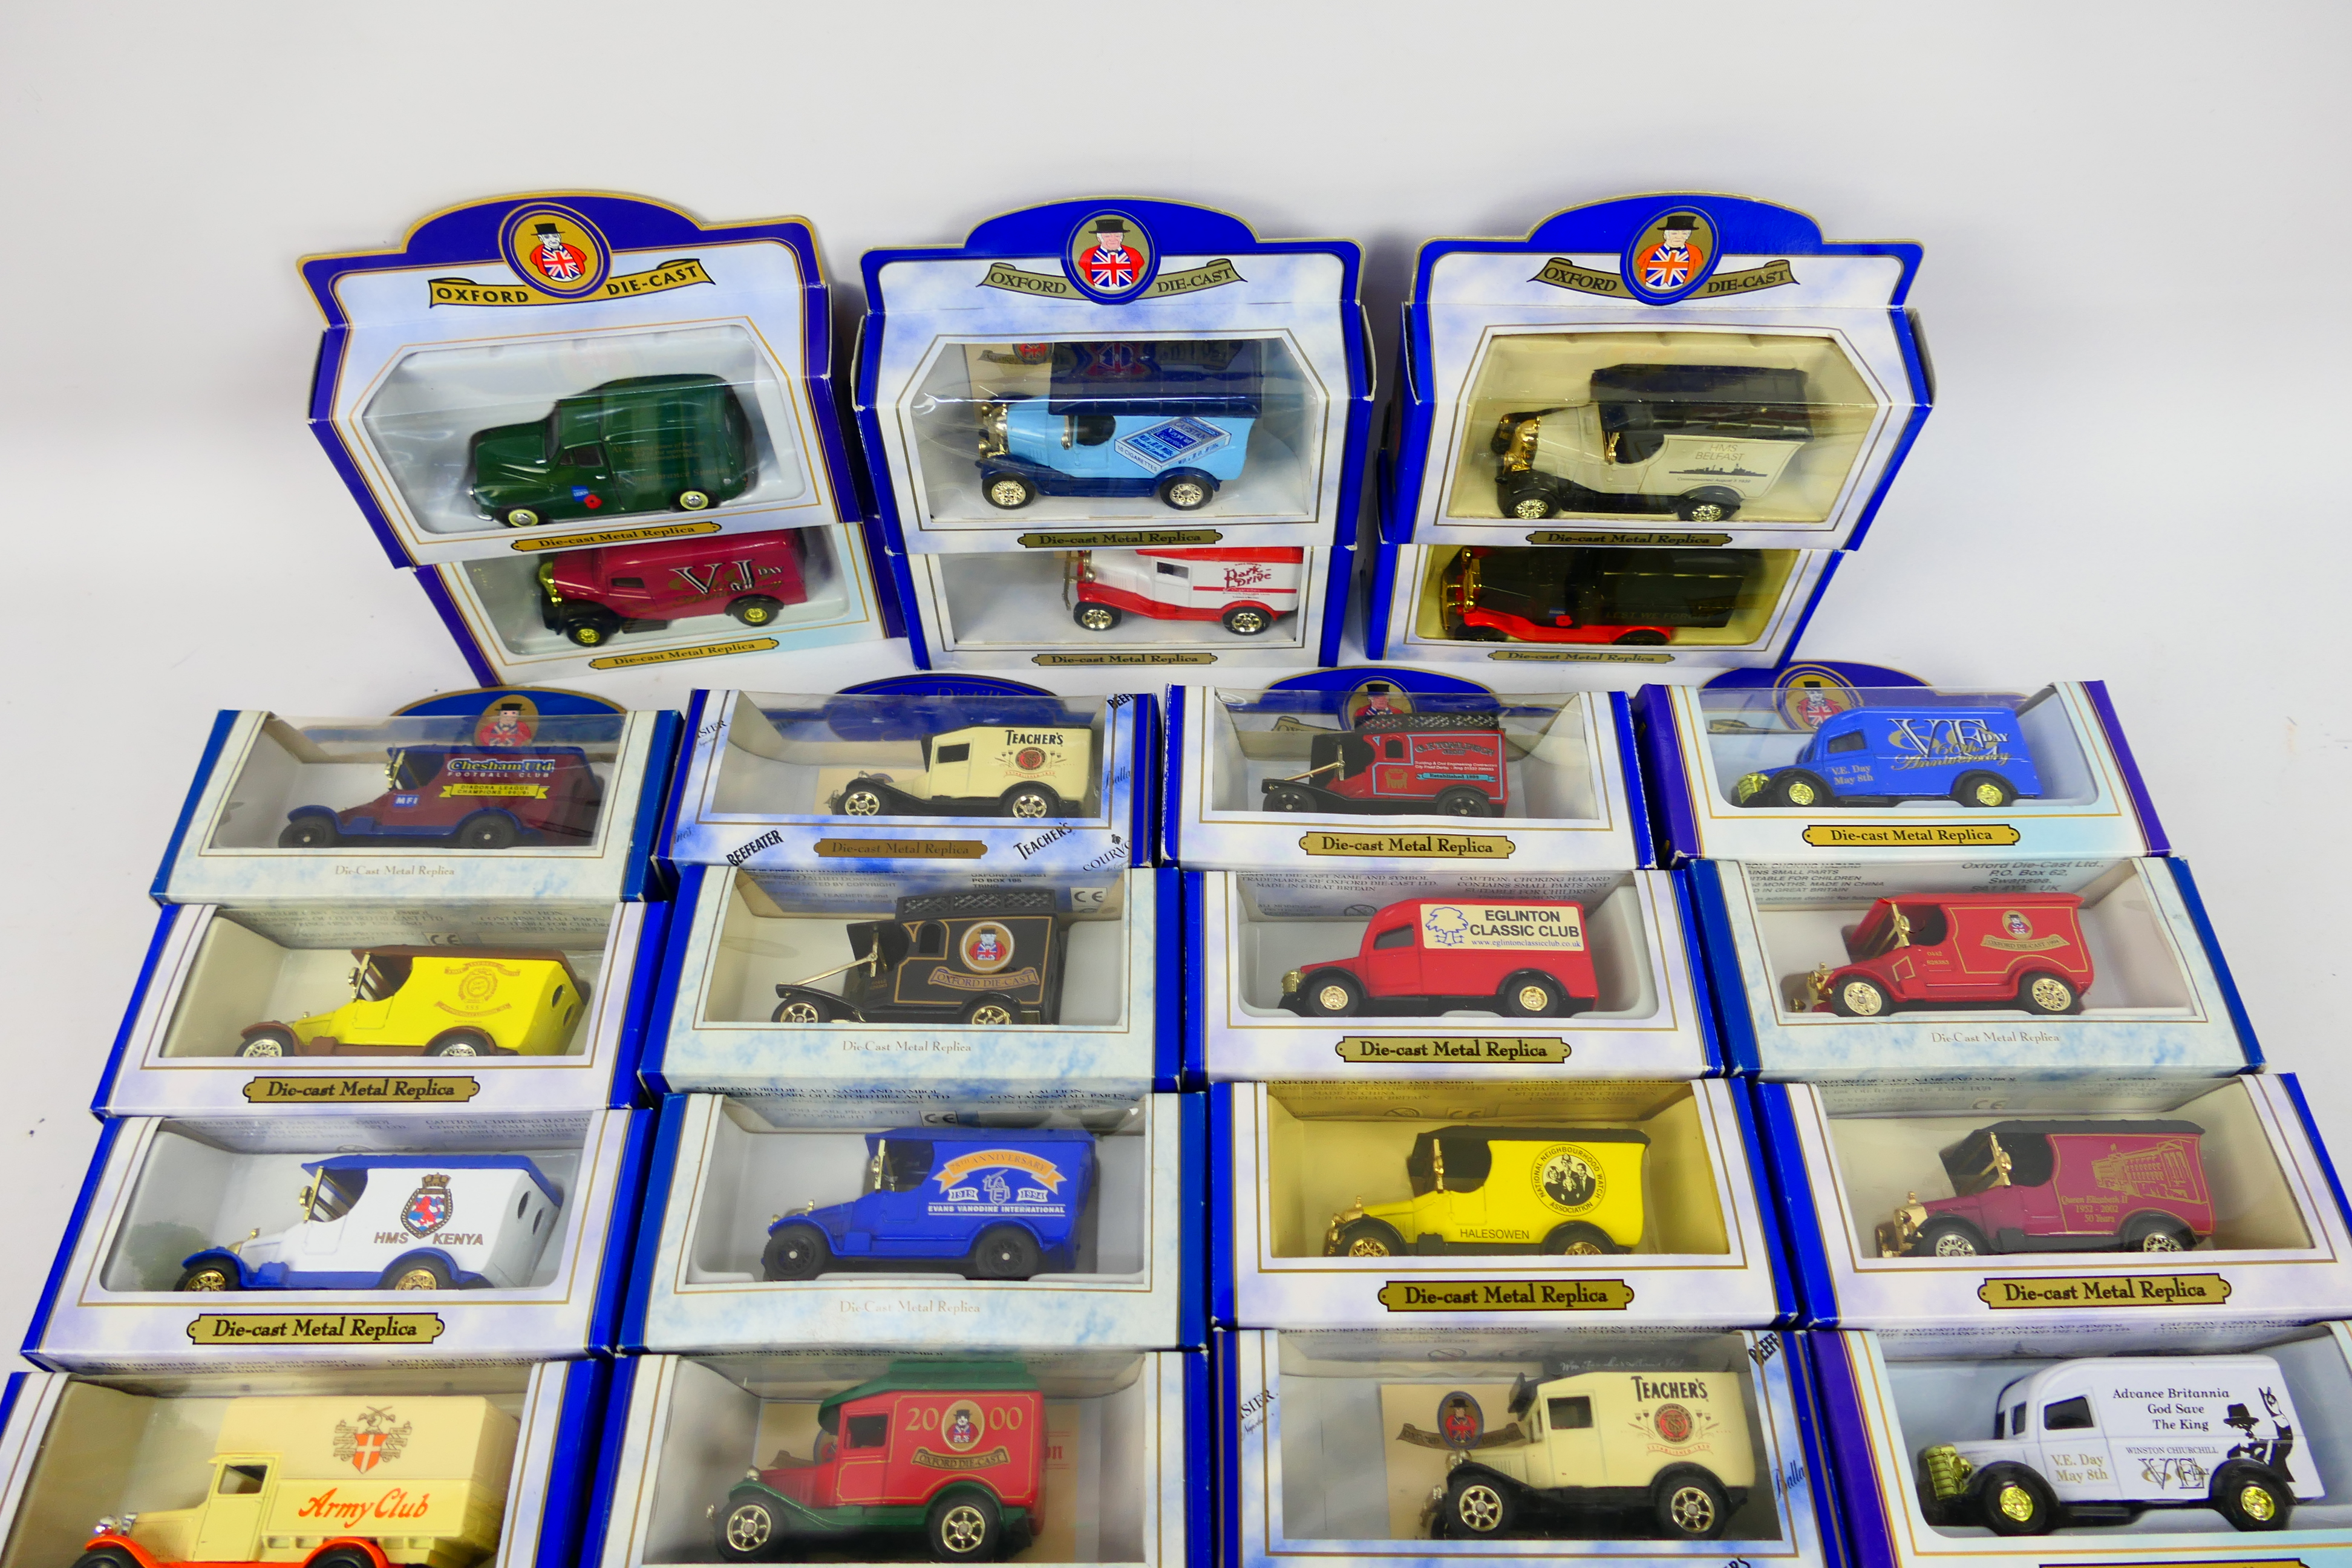 Oxford Diecast - A collection of 30 Oxford Diecast Metal replica vehicles including HMS Kenya, - Image 2 of 3